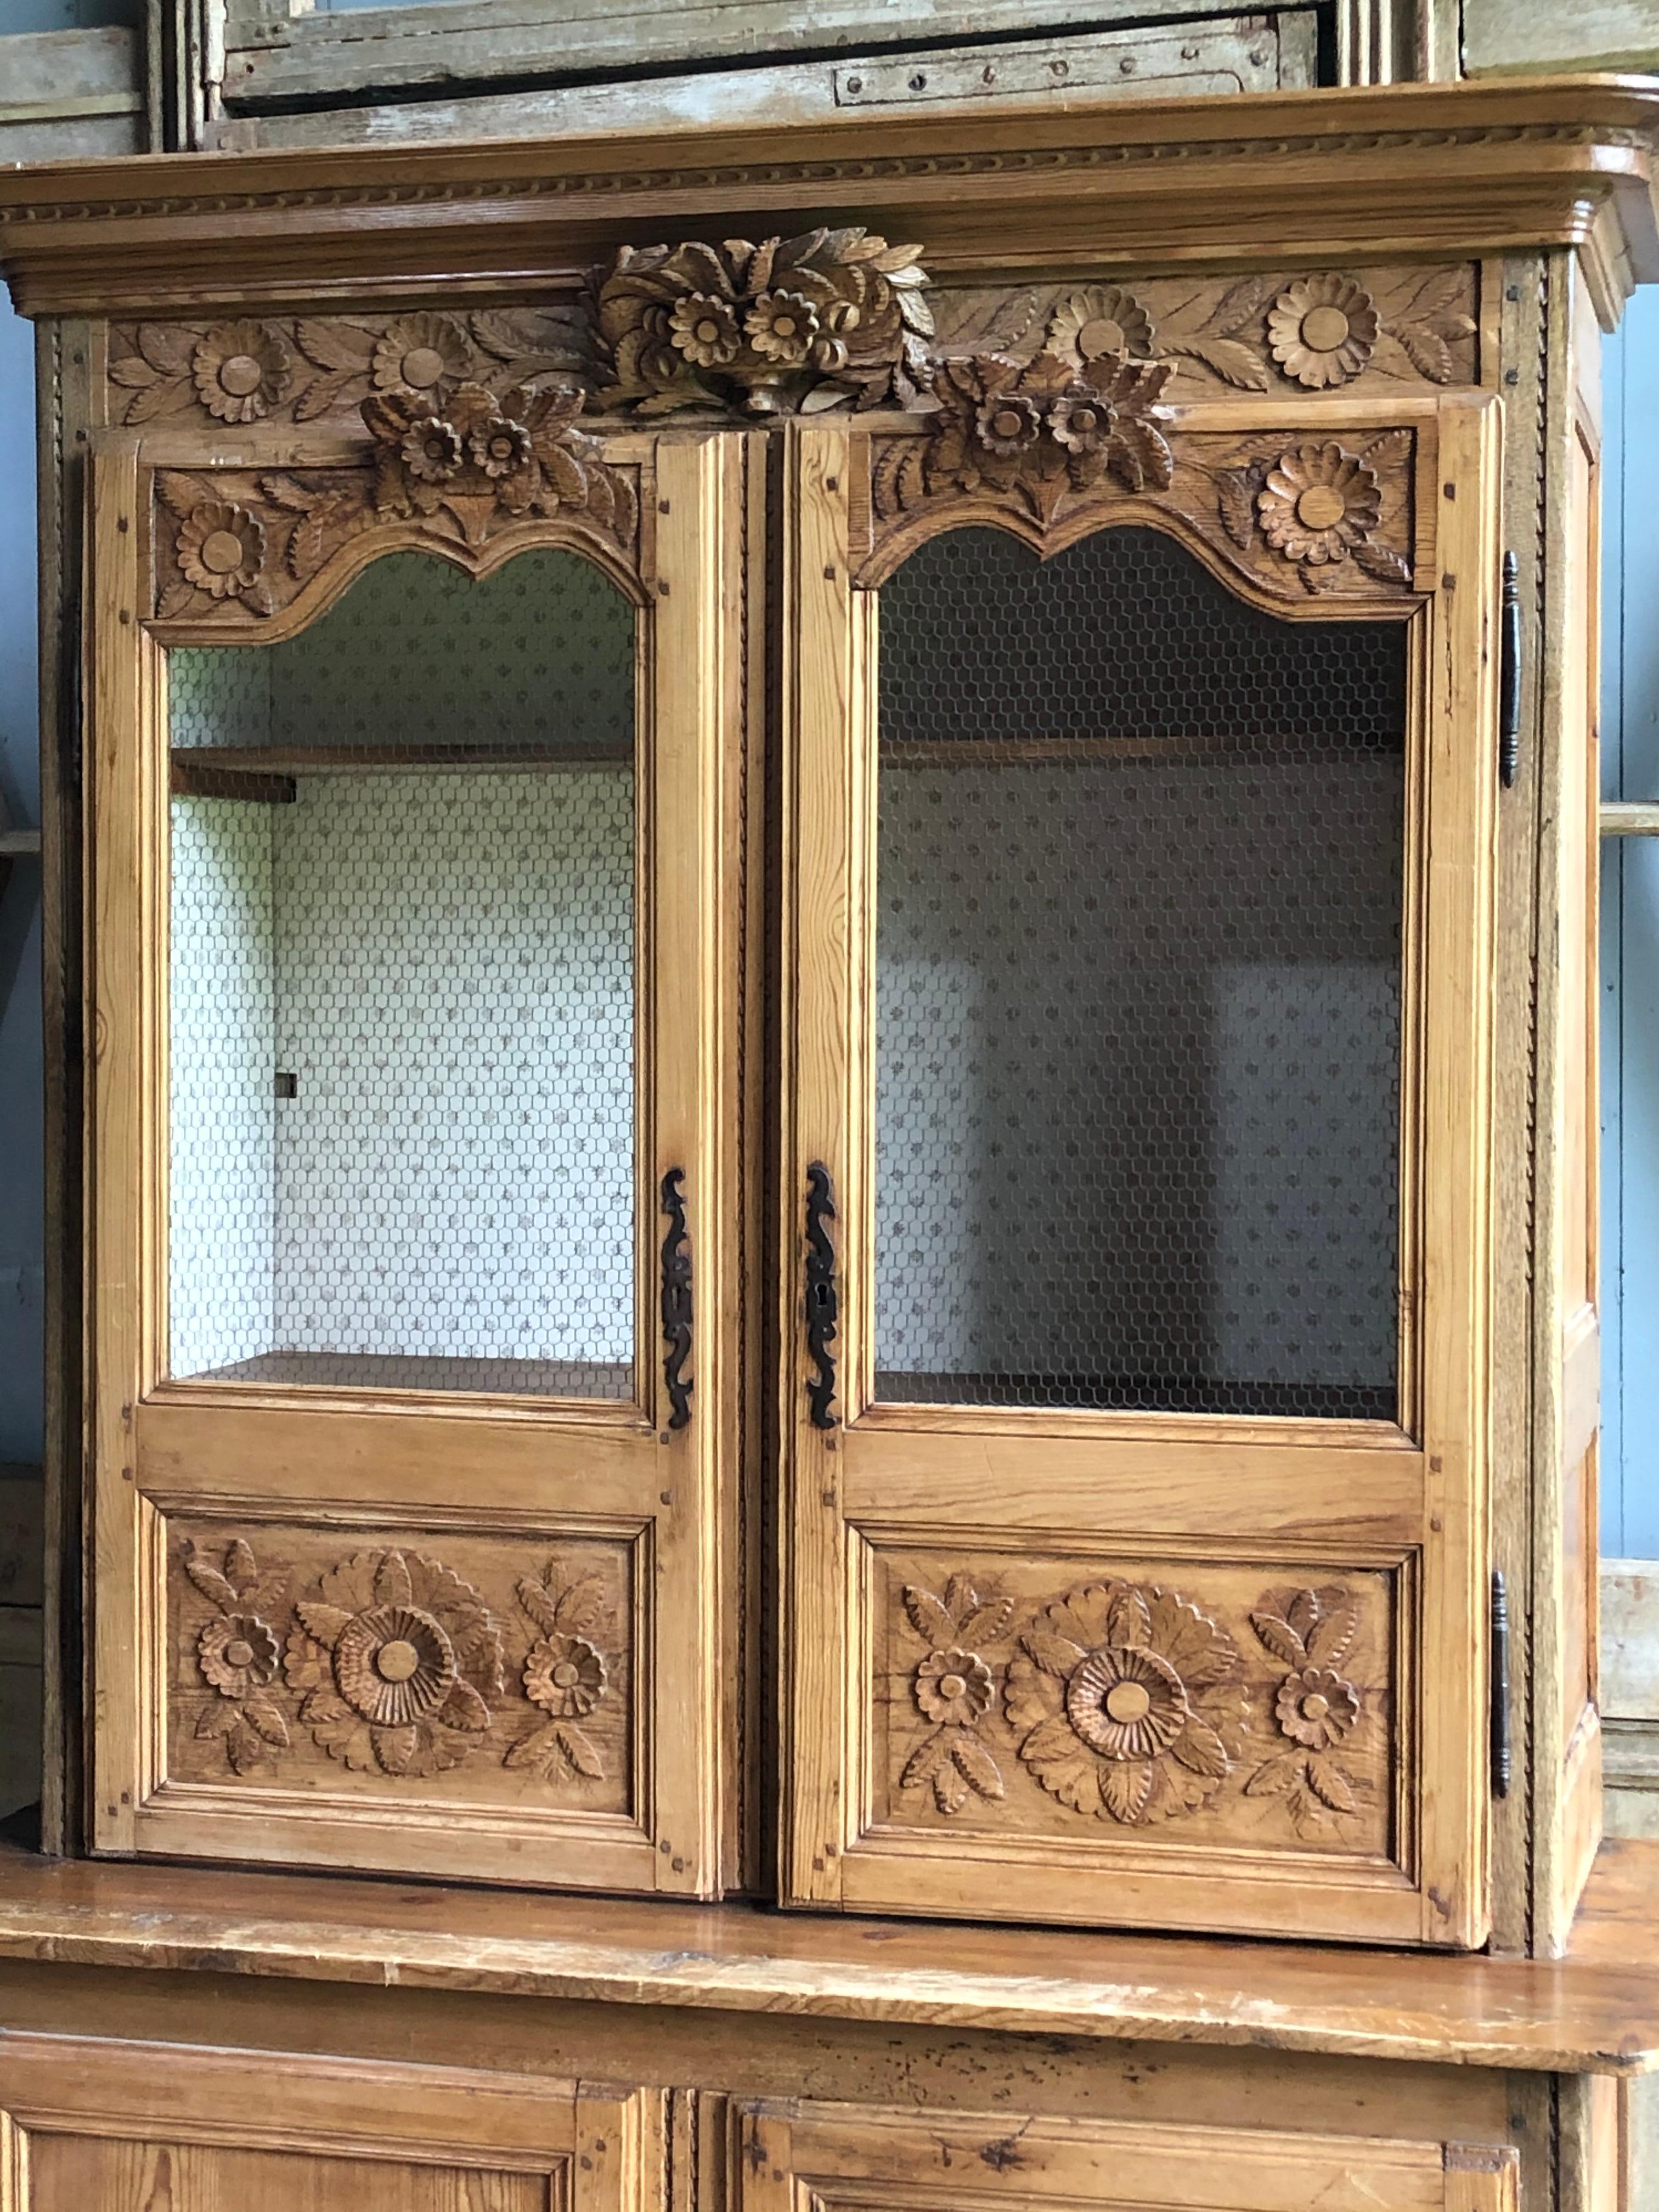 A nicely carved French buffet a deux corps in pine, from the Normandy region circa 1800, carved with floral motifs, wire grill doors in the upper cabinet and the interior lined with wallpaper. The lower cabinet was recently fitted with a drawer and